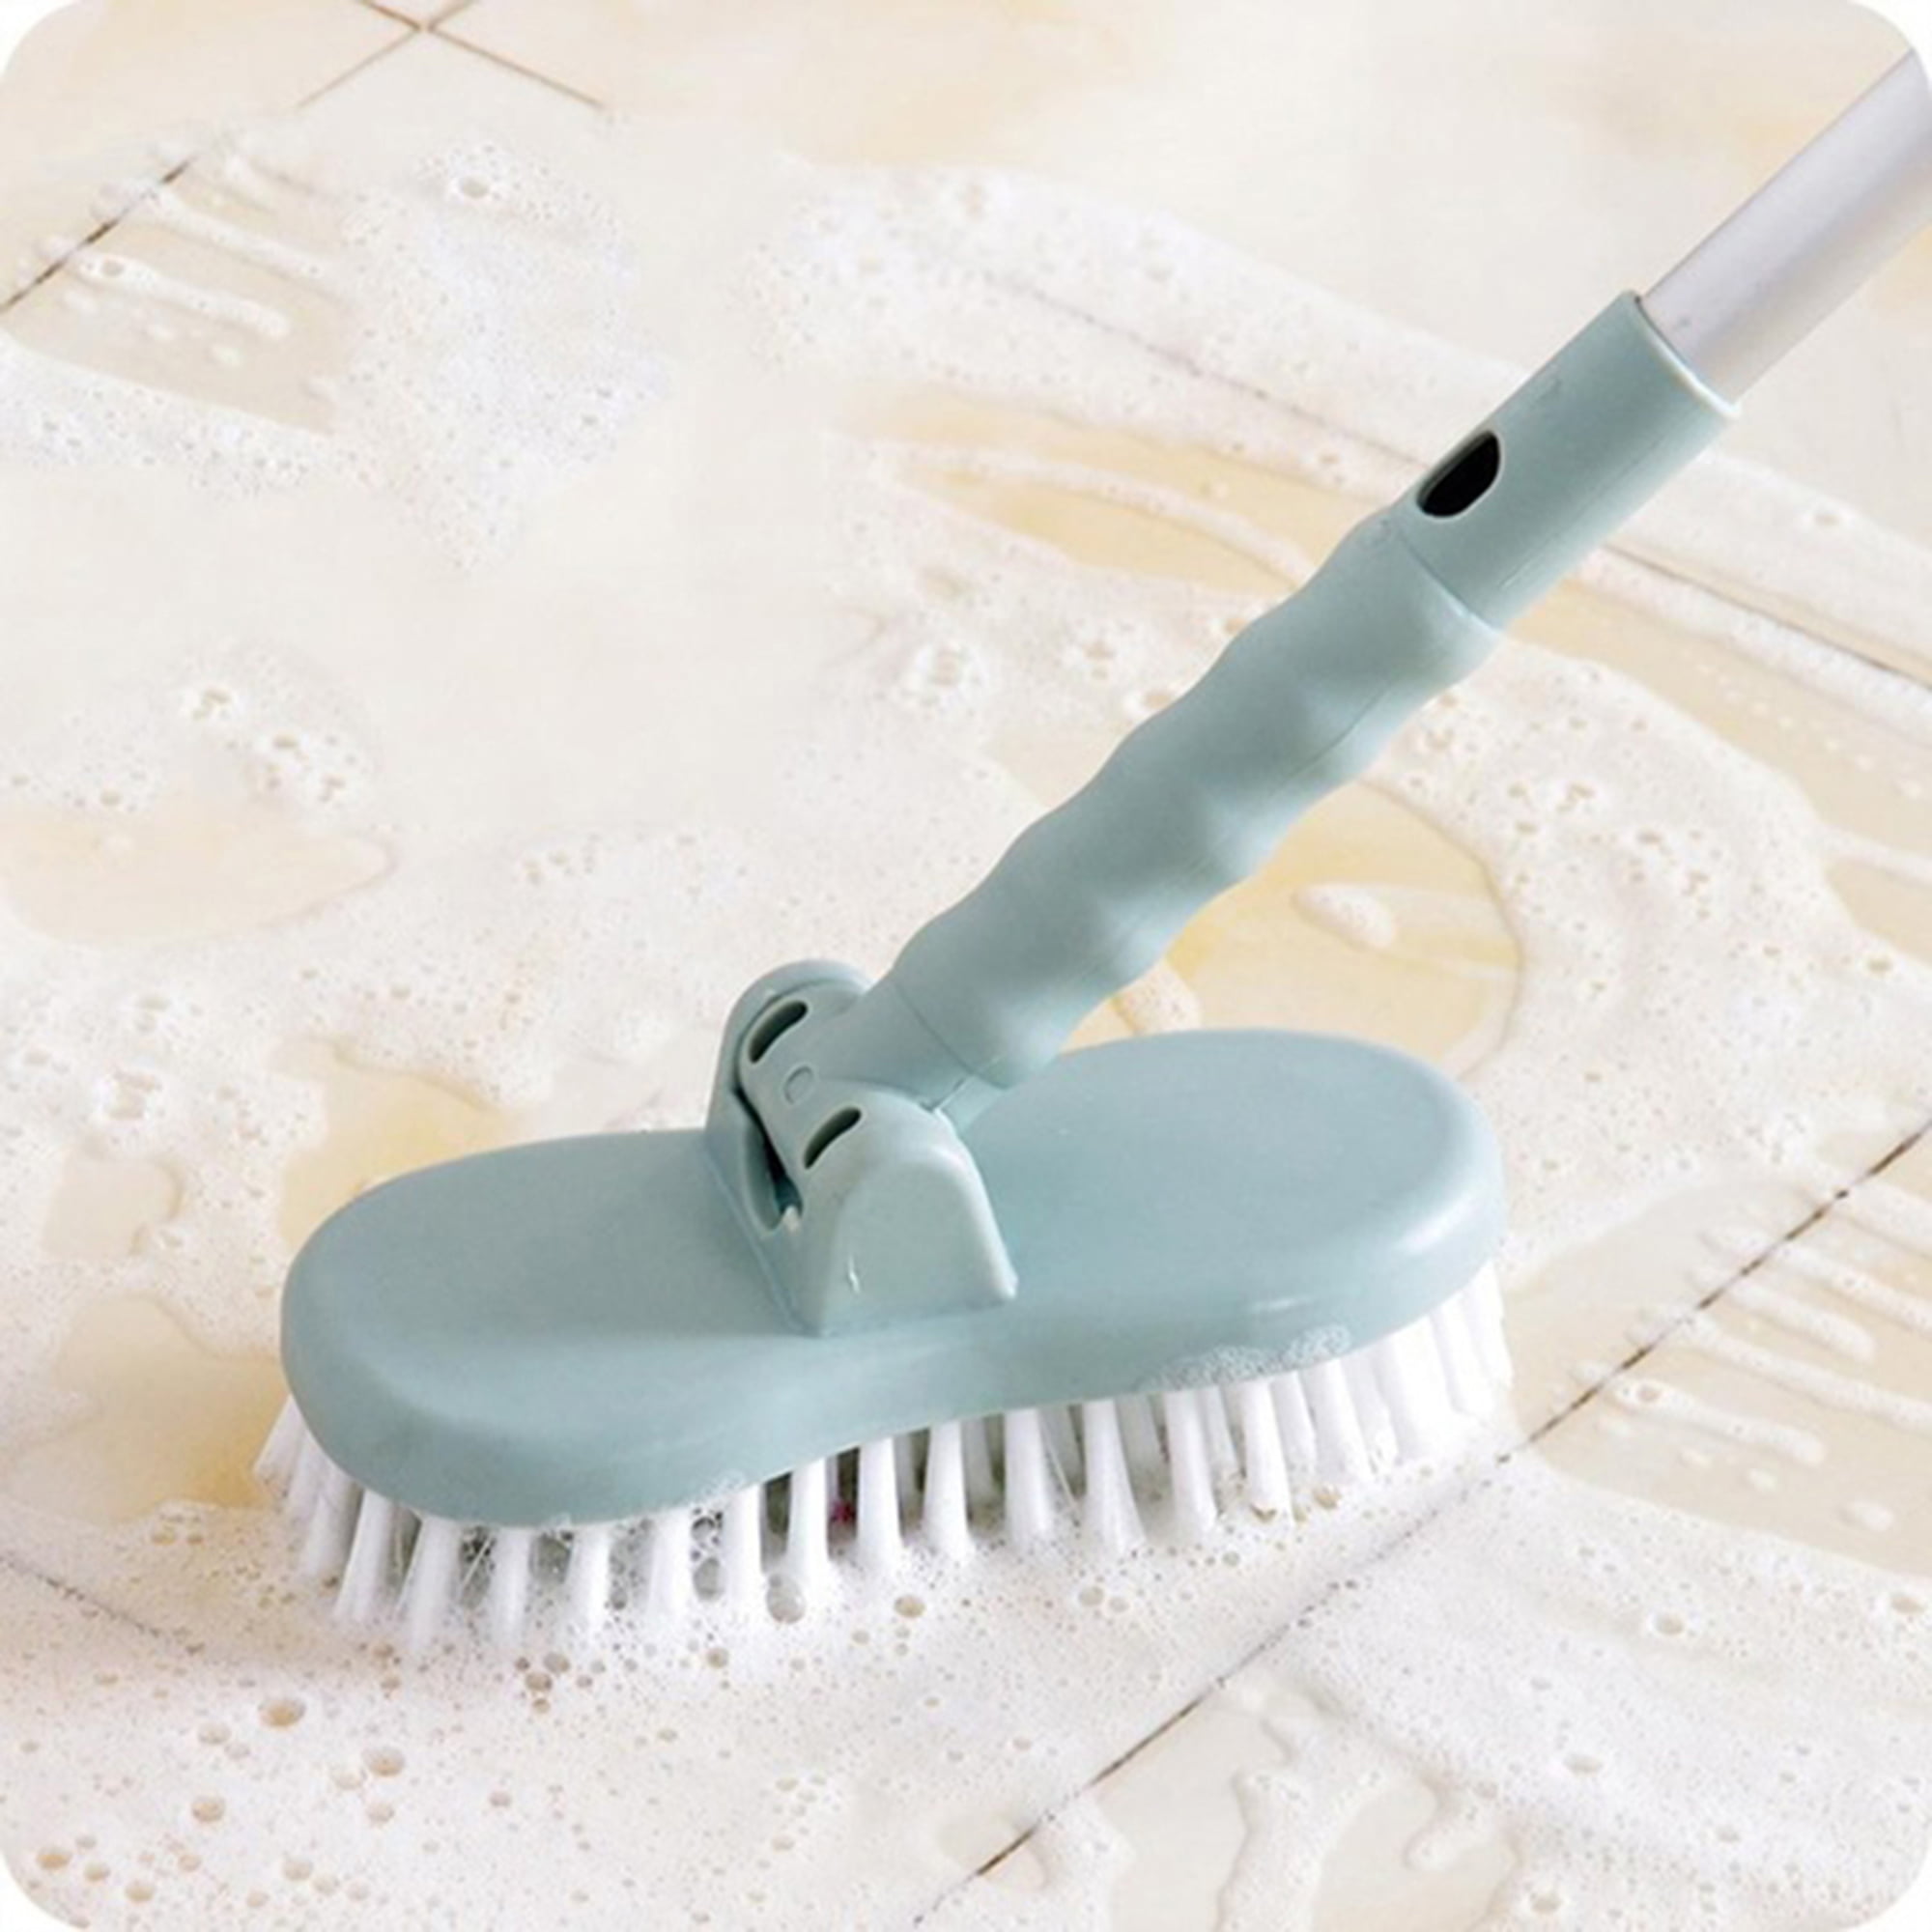 Dropship 1pc Bathroom Brush; Tile Corner Crevice Brush; Multifunctional  Cleaning Brush; Floor Drain Brush 9.06x4.13 to Sell Online at a Lower  Price